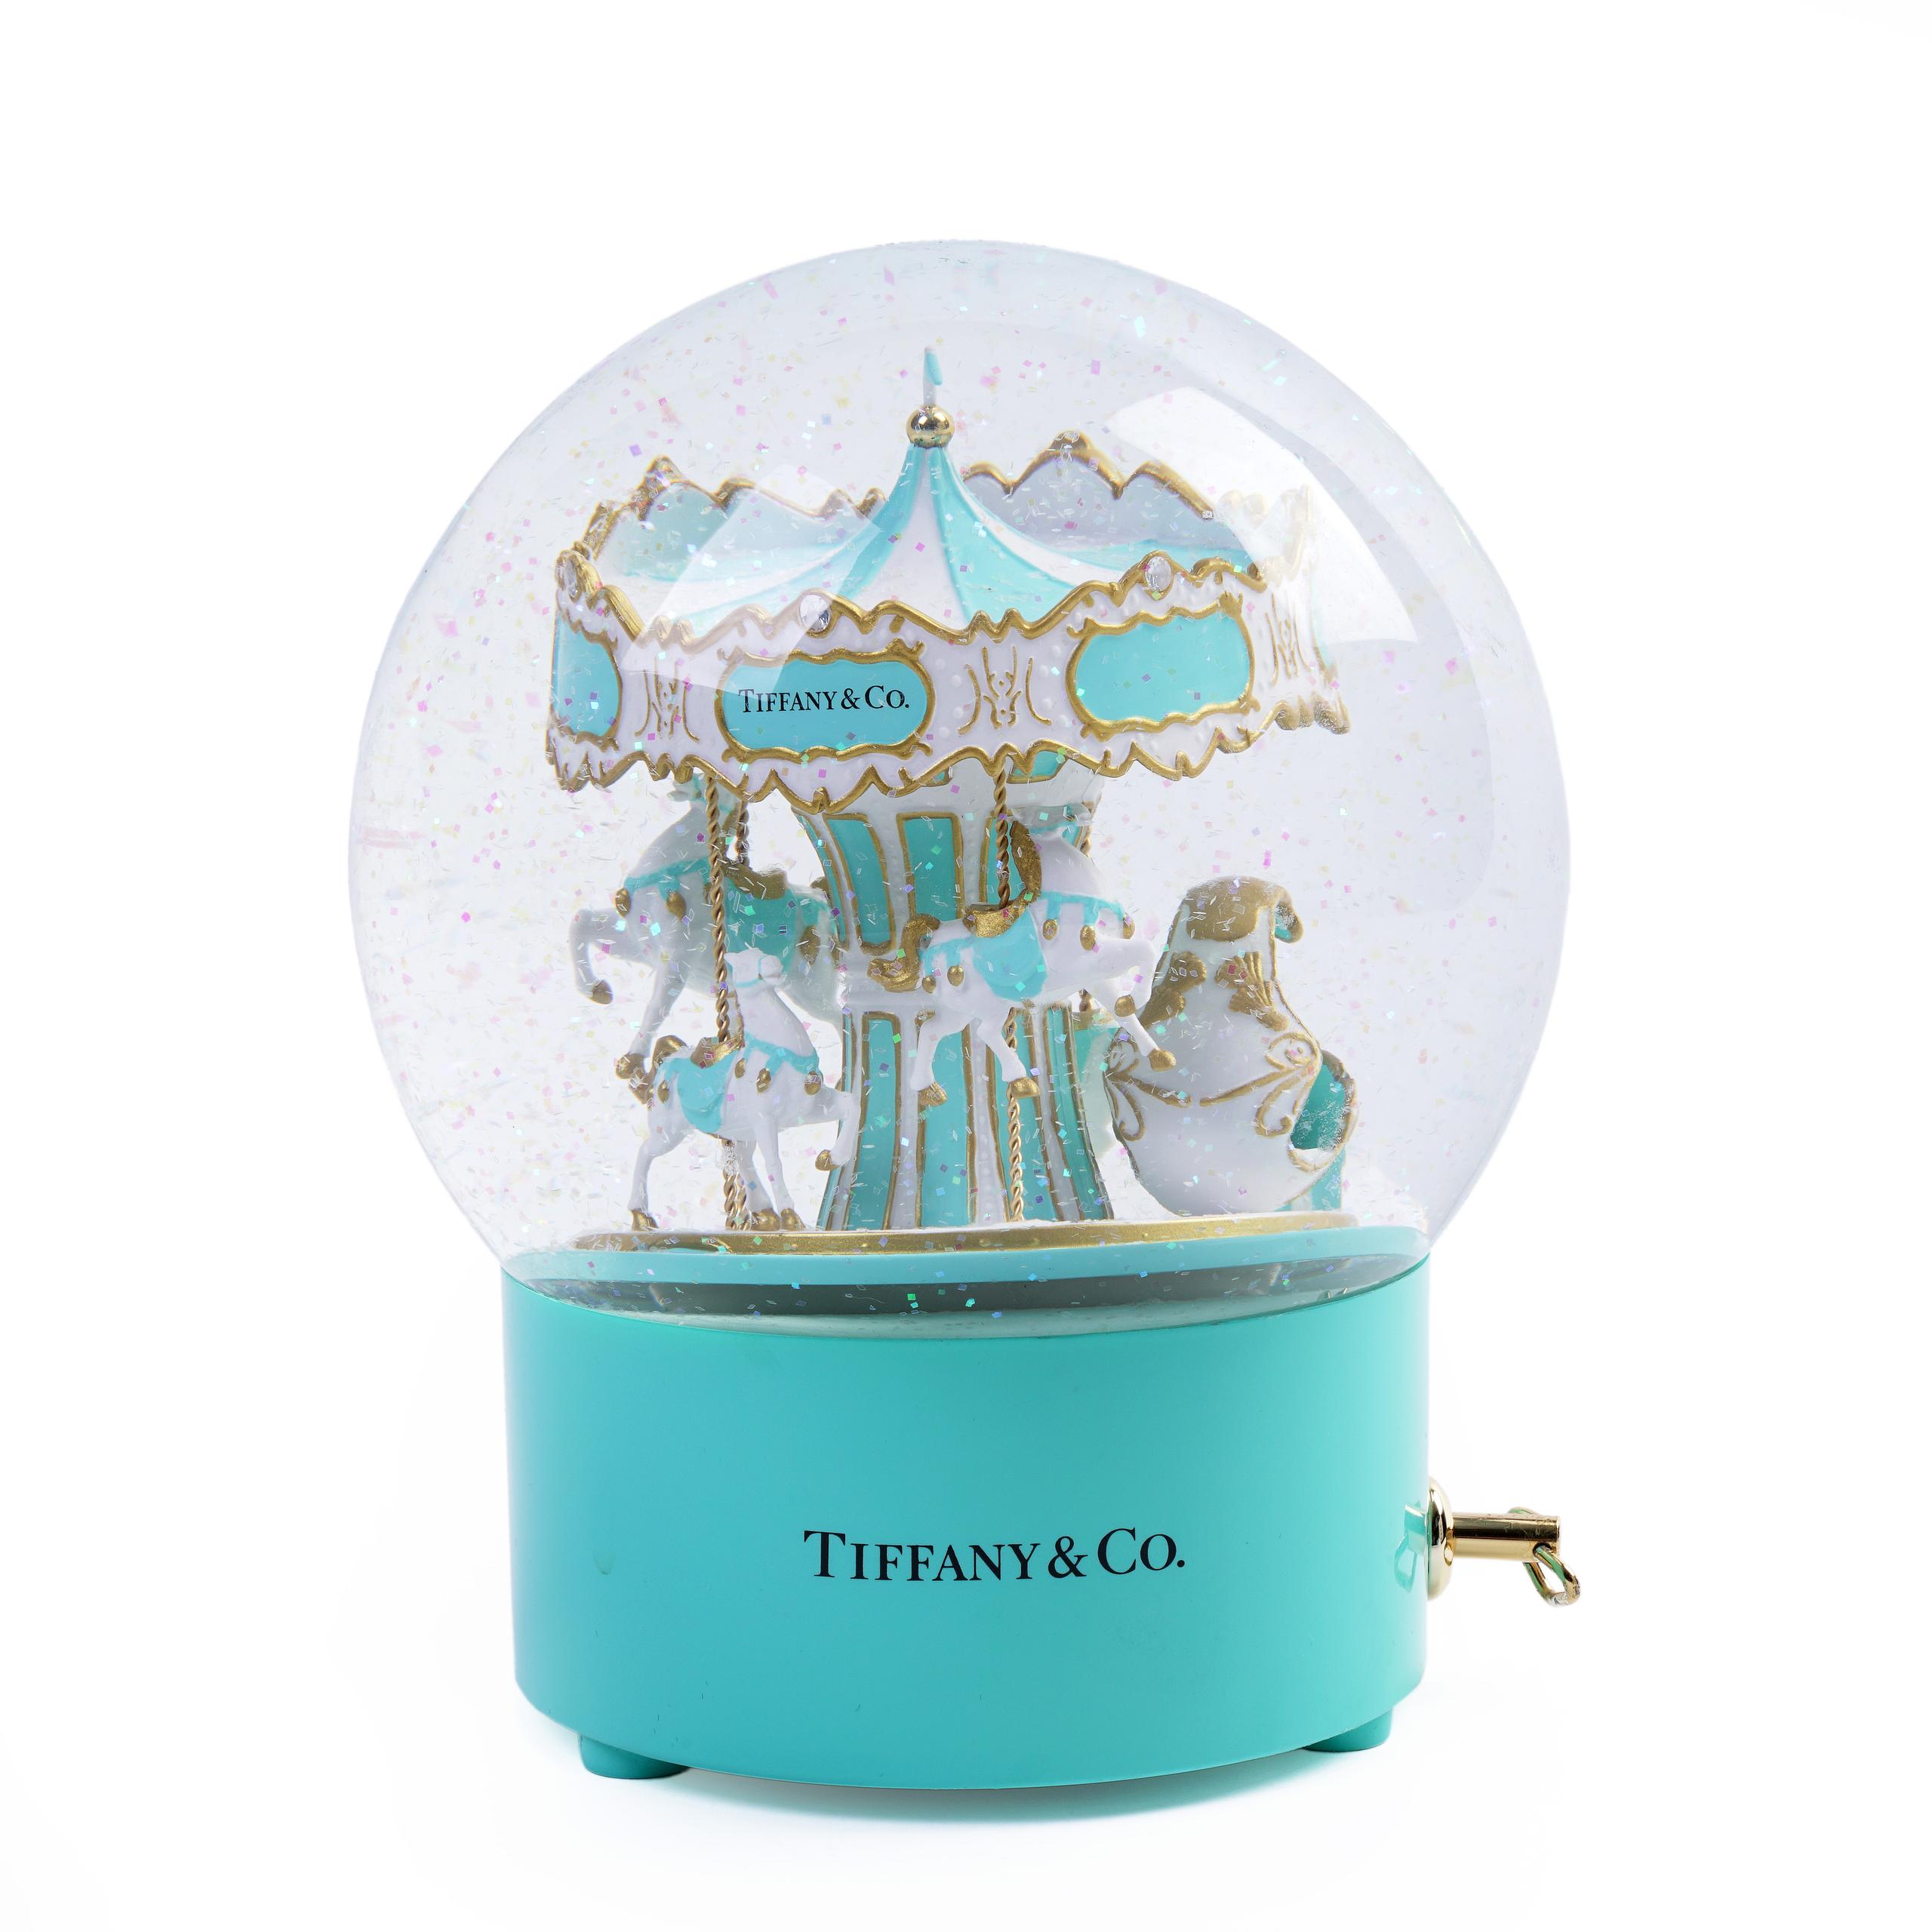 Sold at Auction: Tiffany & Co. Merry Go Round Music Box